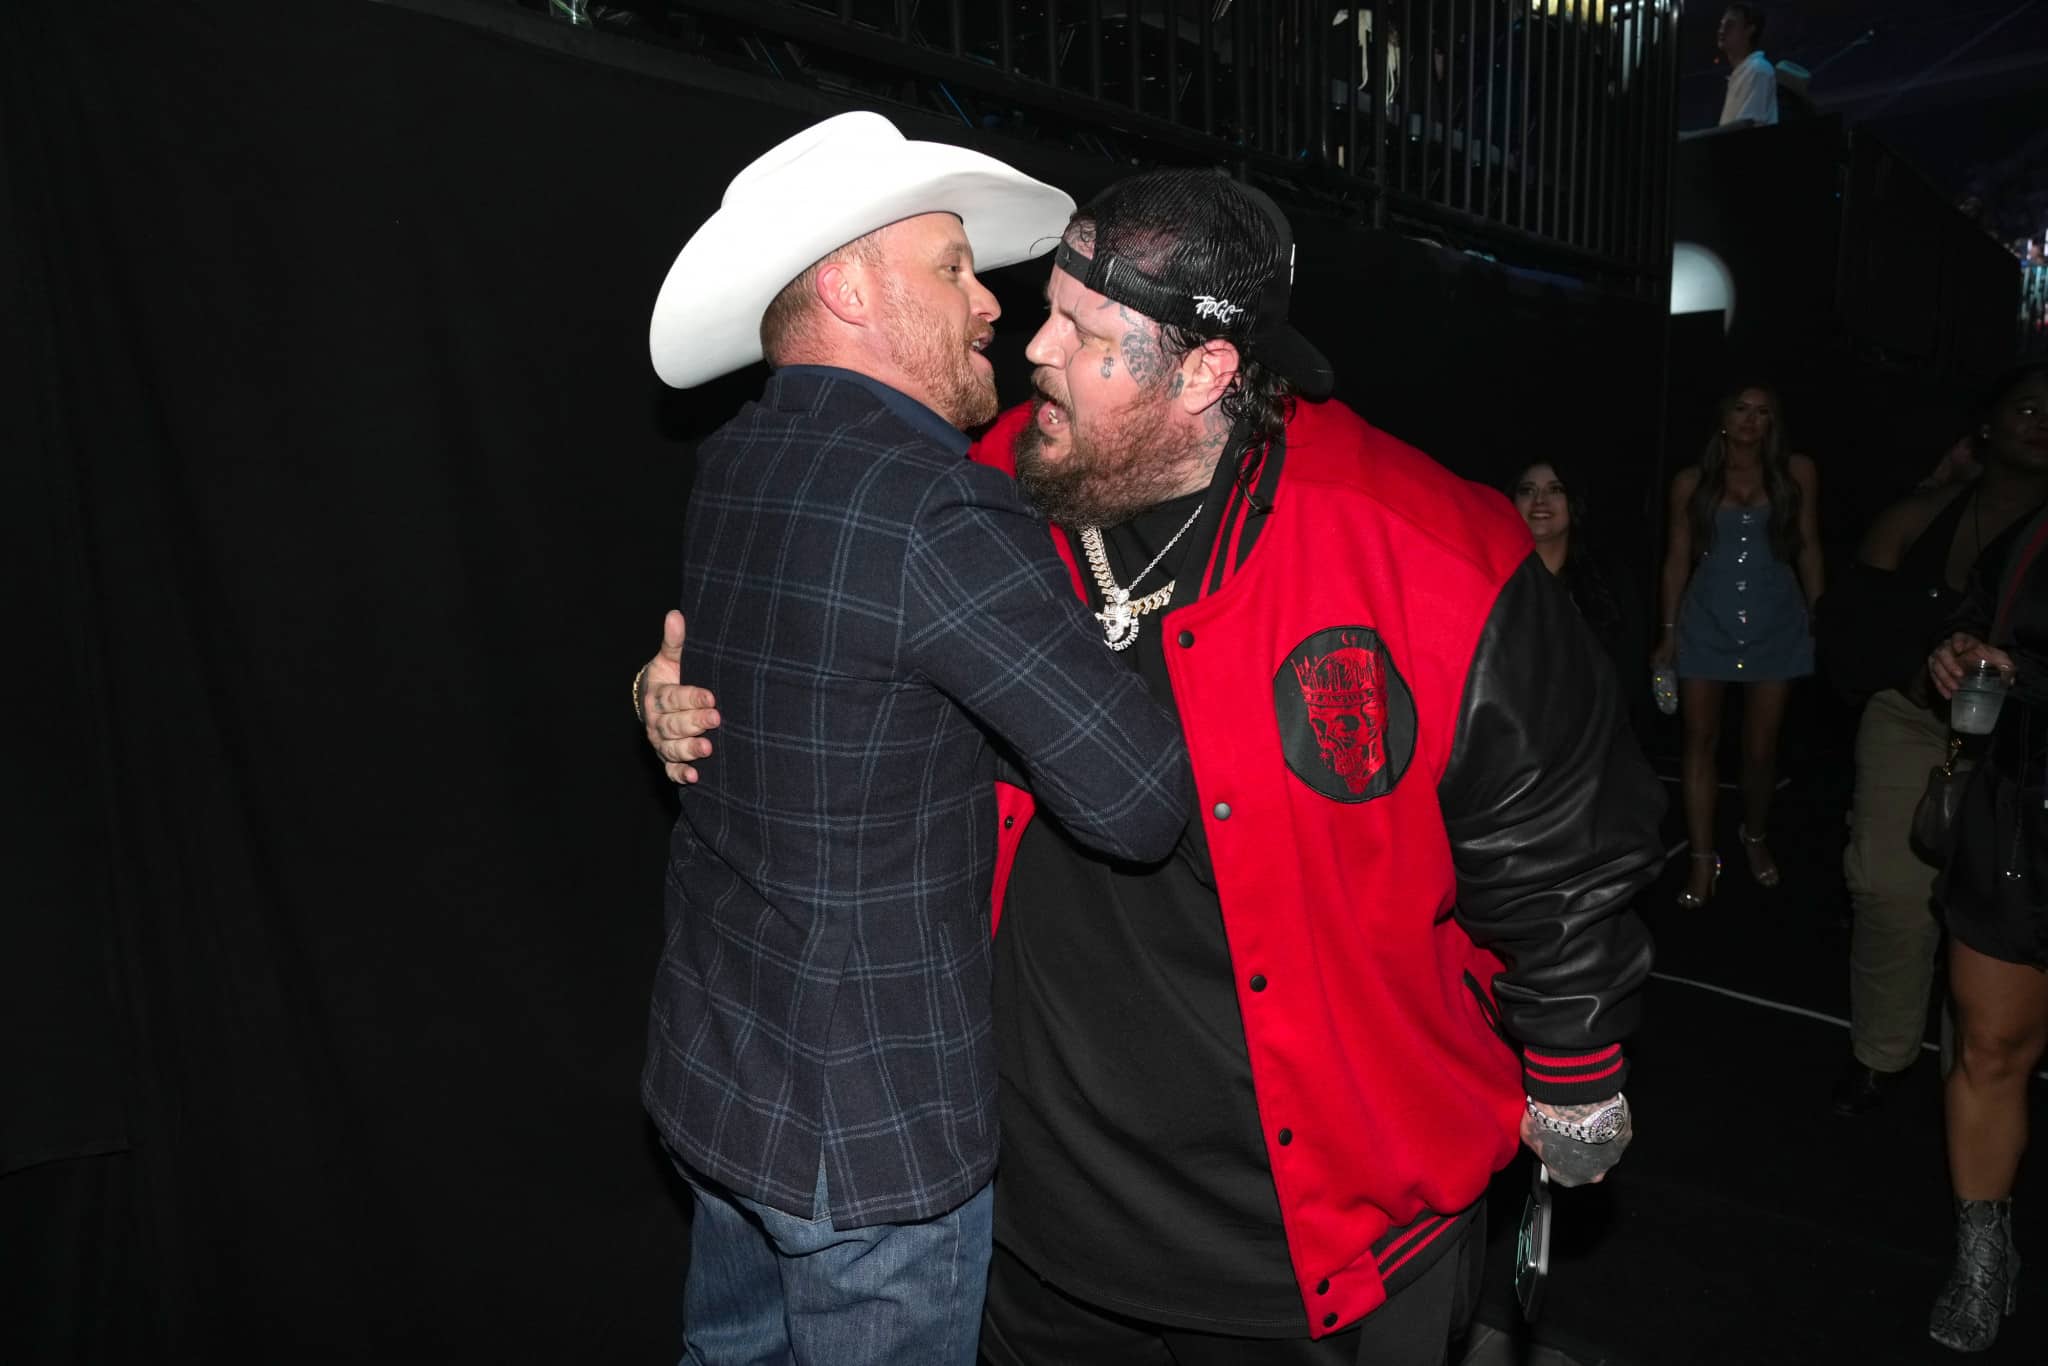 Cody Johnson hugs Jelly Roll to congratulate him on his Male Video of the Year win at the 2023 CMT Music Awards.